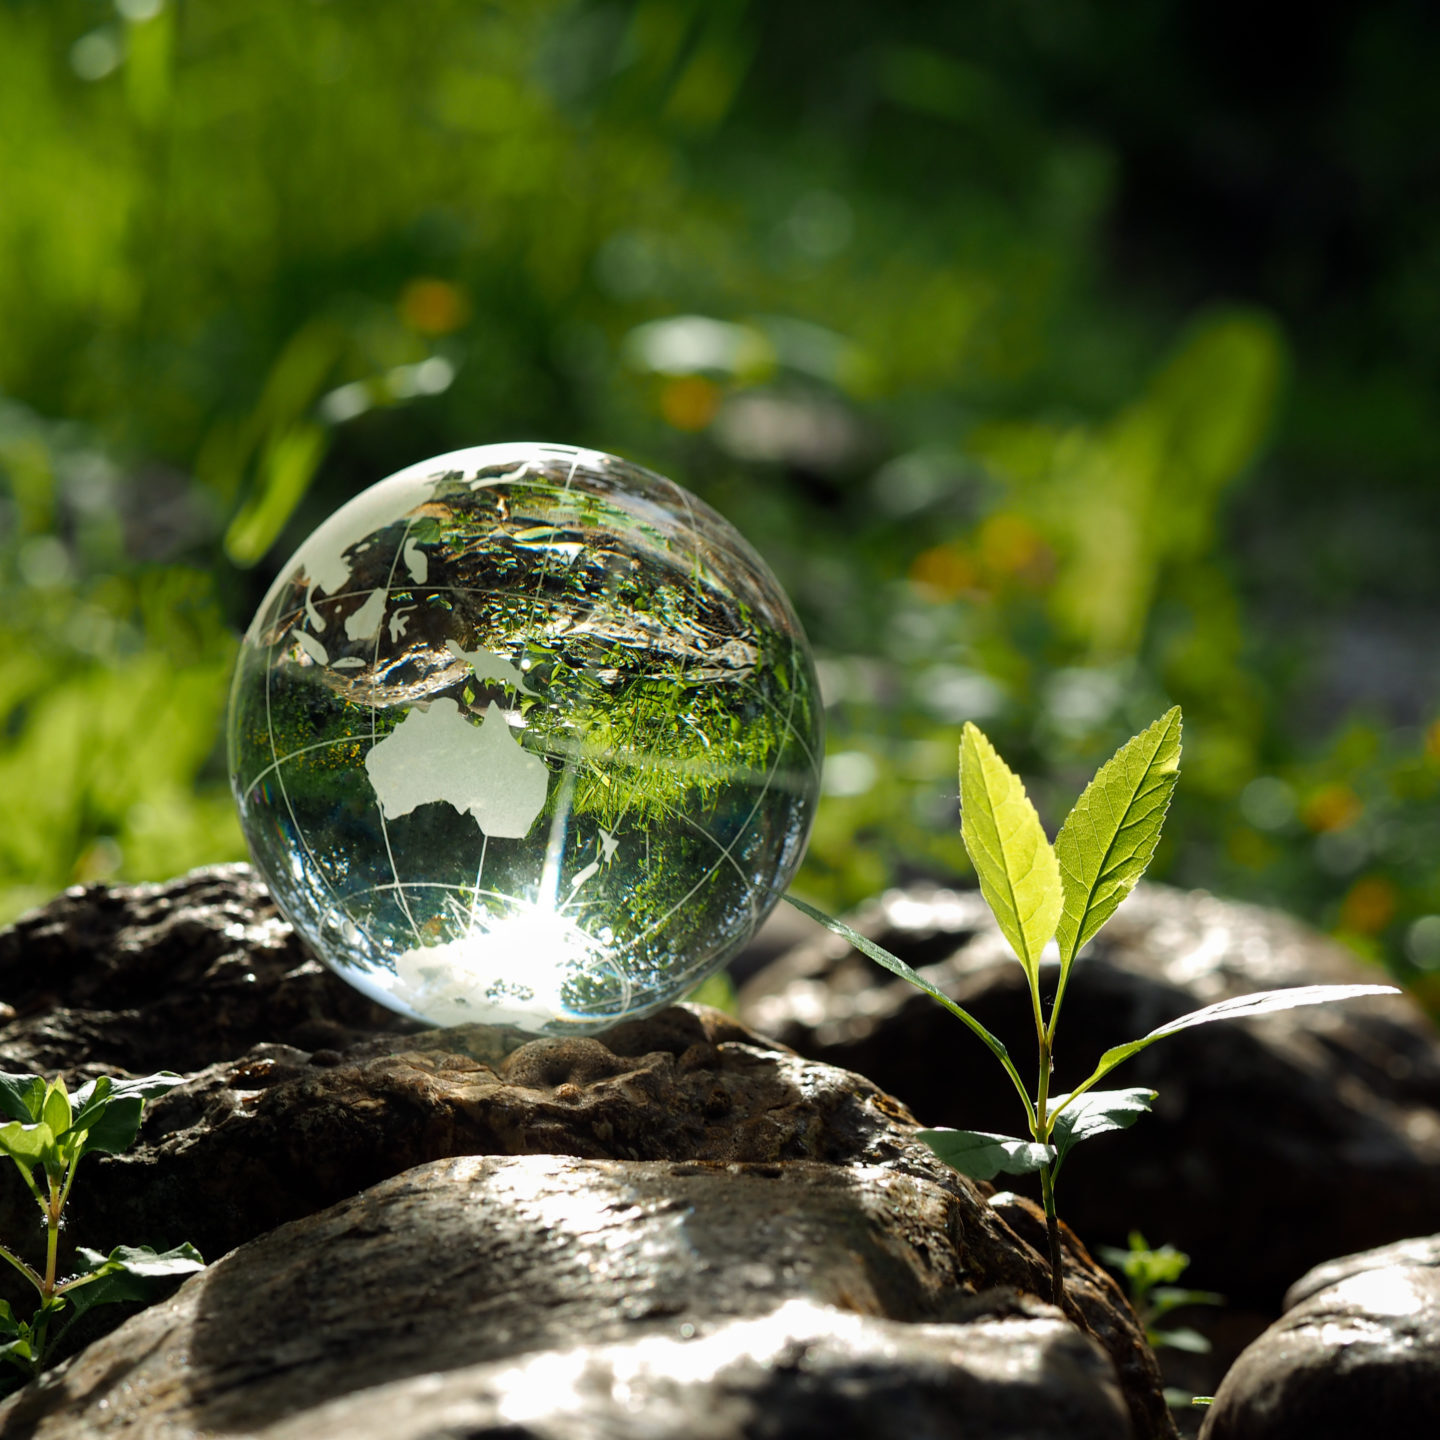 Glass ball on the rocks. The young green plant. Reflection of nature in a bowl. A lot of sun. The concept - ecology, environmental protection